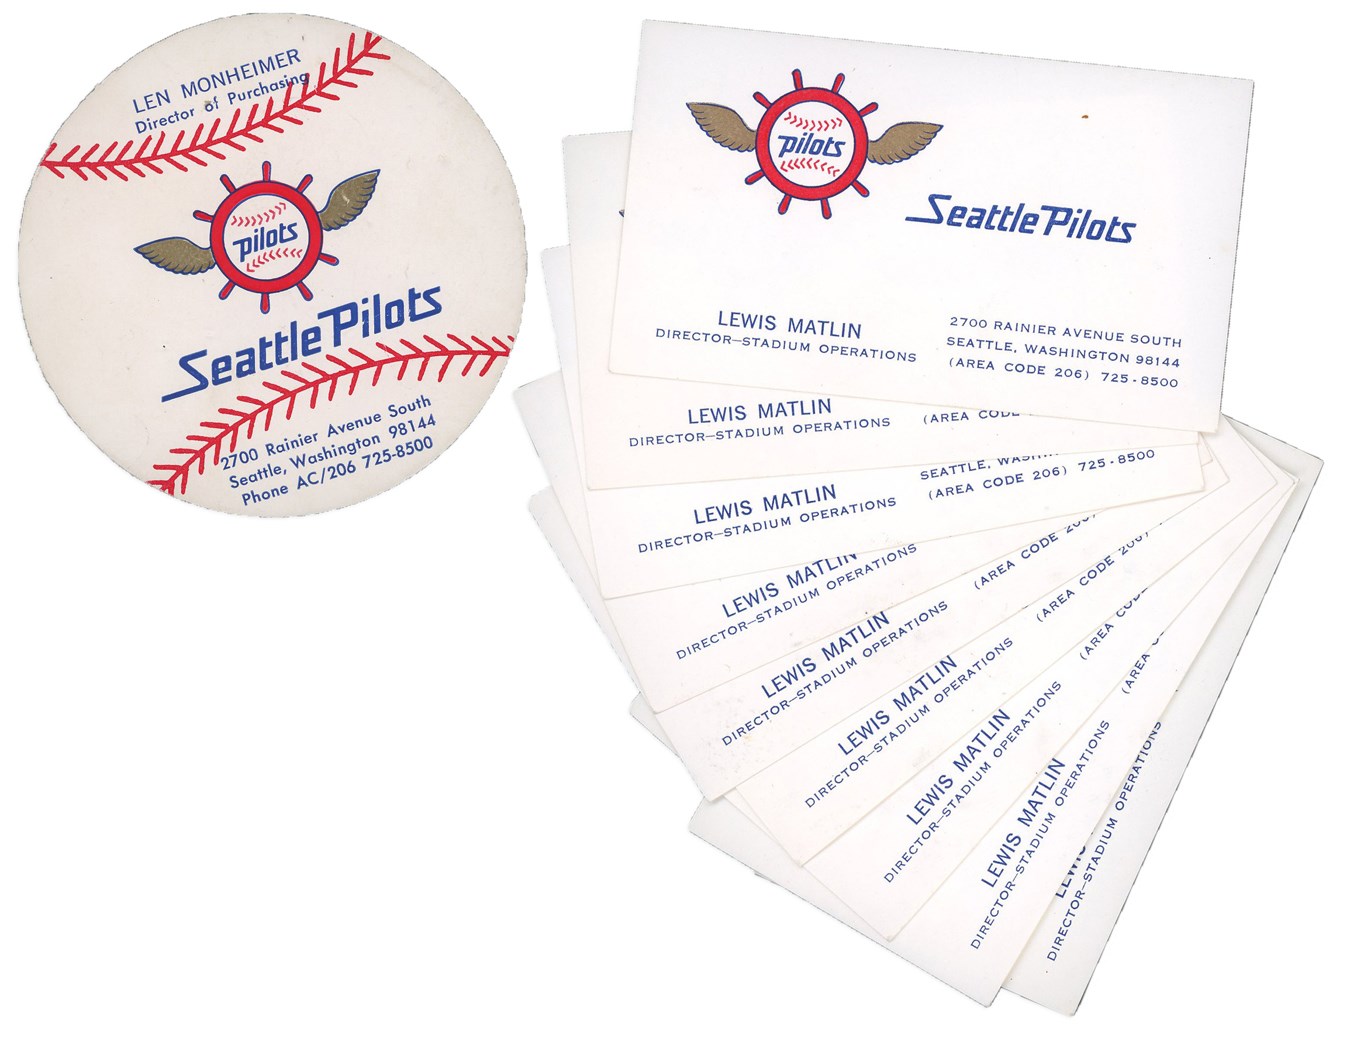 1969 Seattle Pilots Business Cards (23)